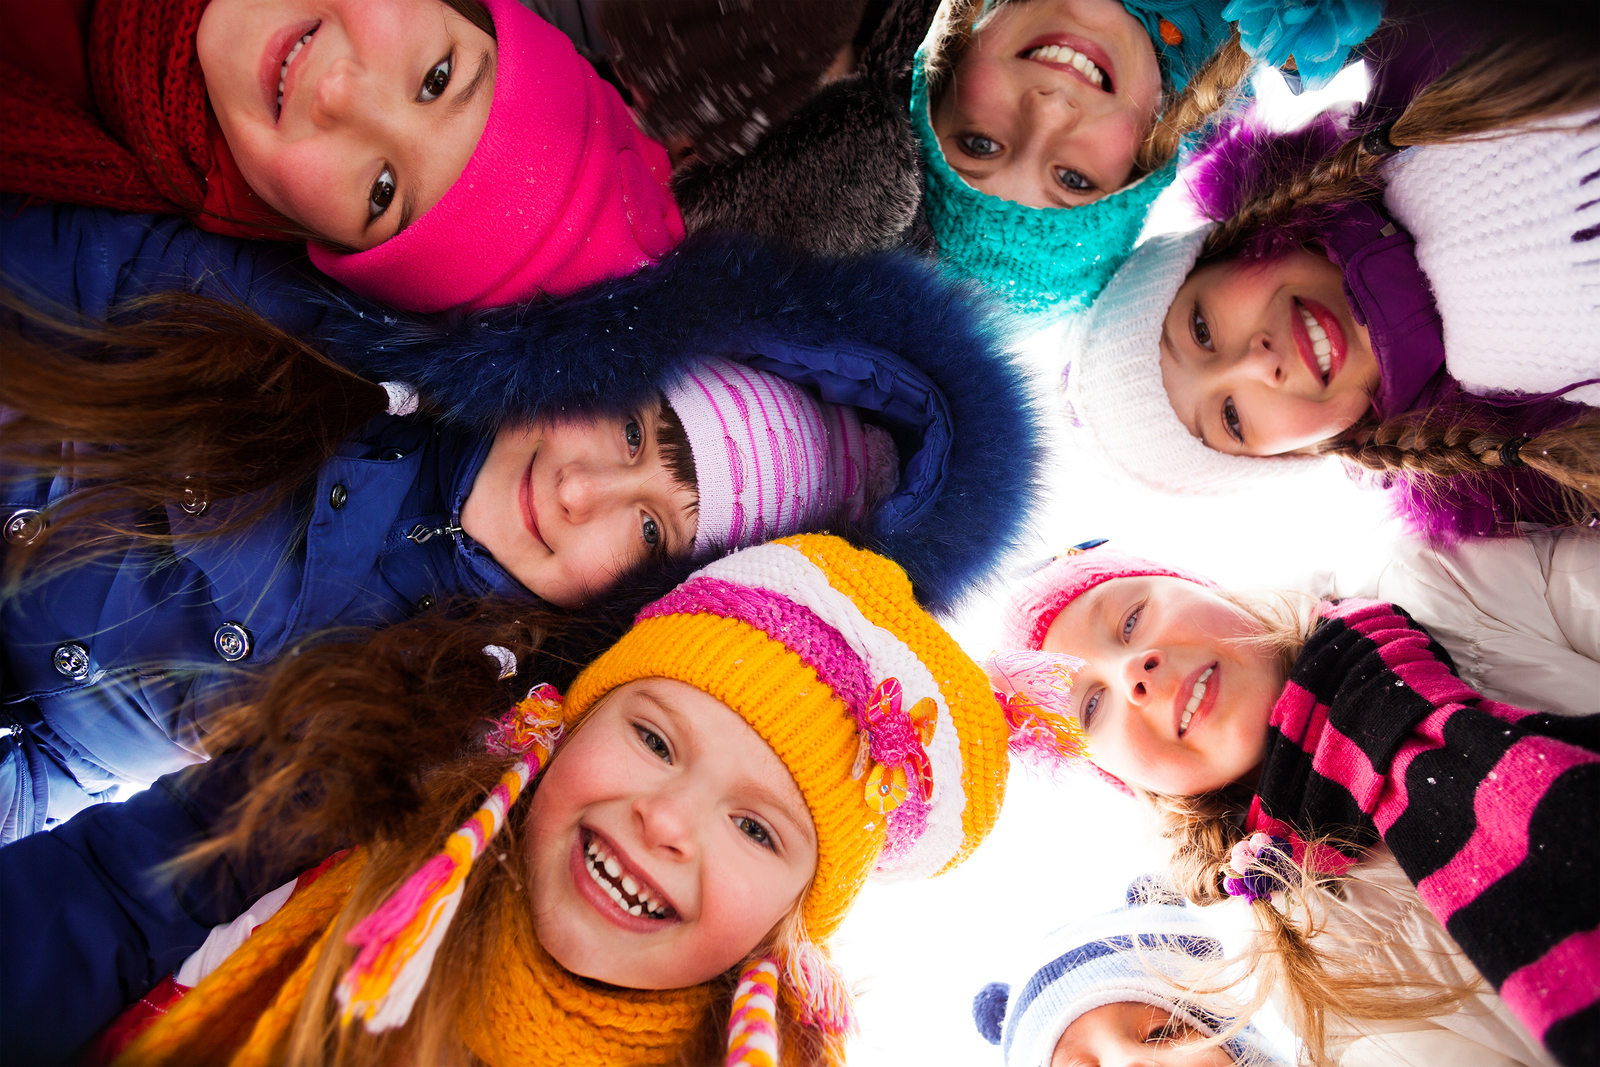 The outside temperature does not affect head lice or their ability to spread to others.